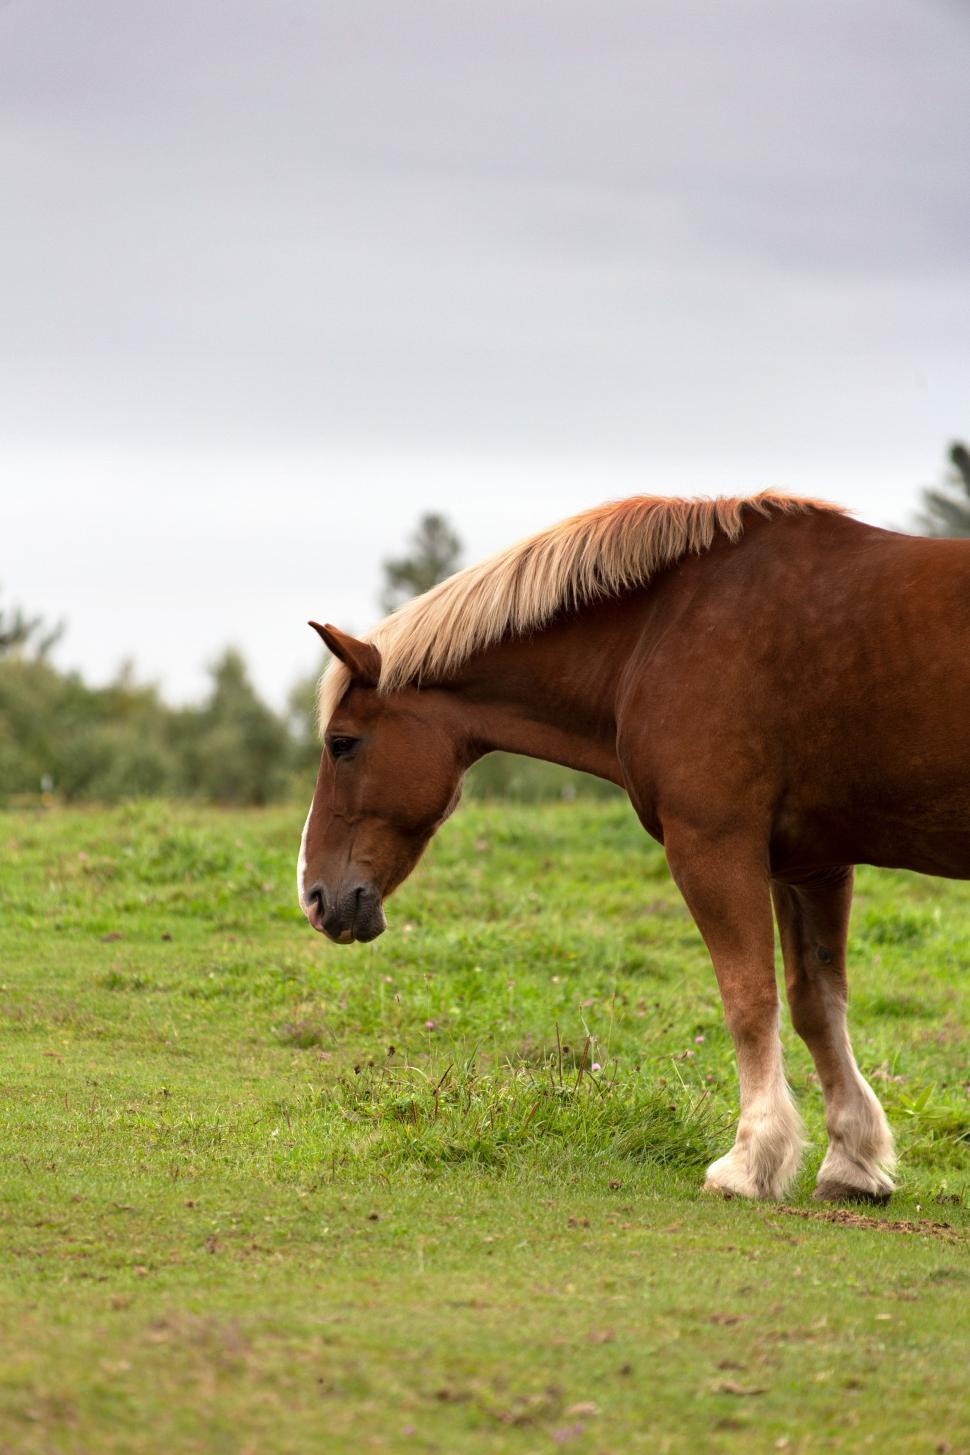 Free Image of A horse standing in a field 